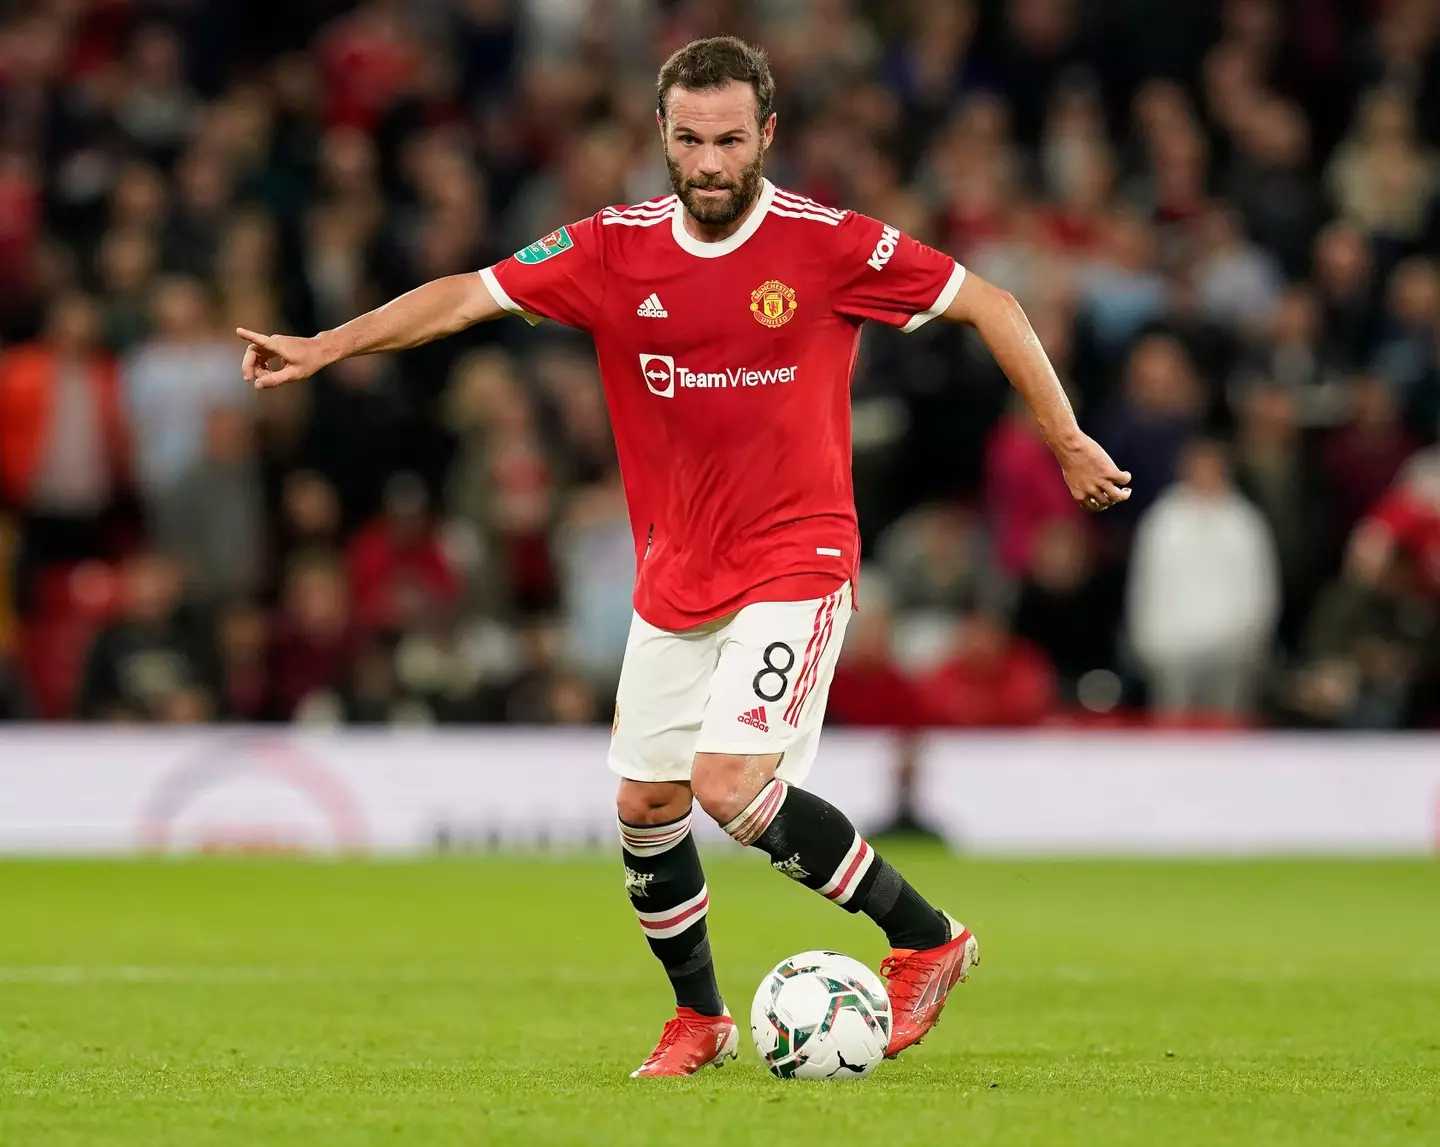 Mata is yet to make a Premier League appearance this season (Image: Alamy)